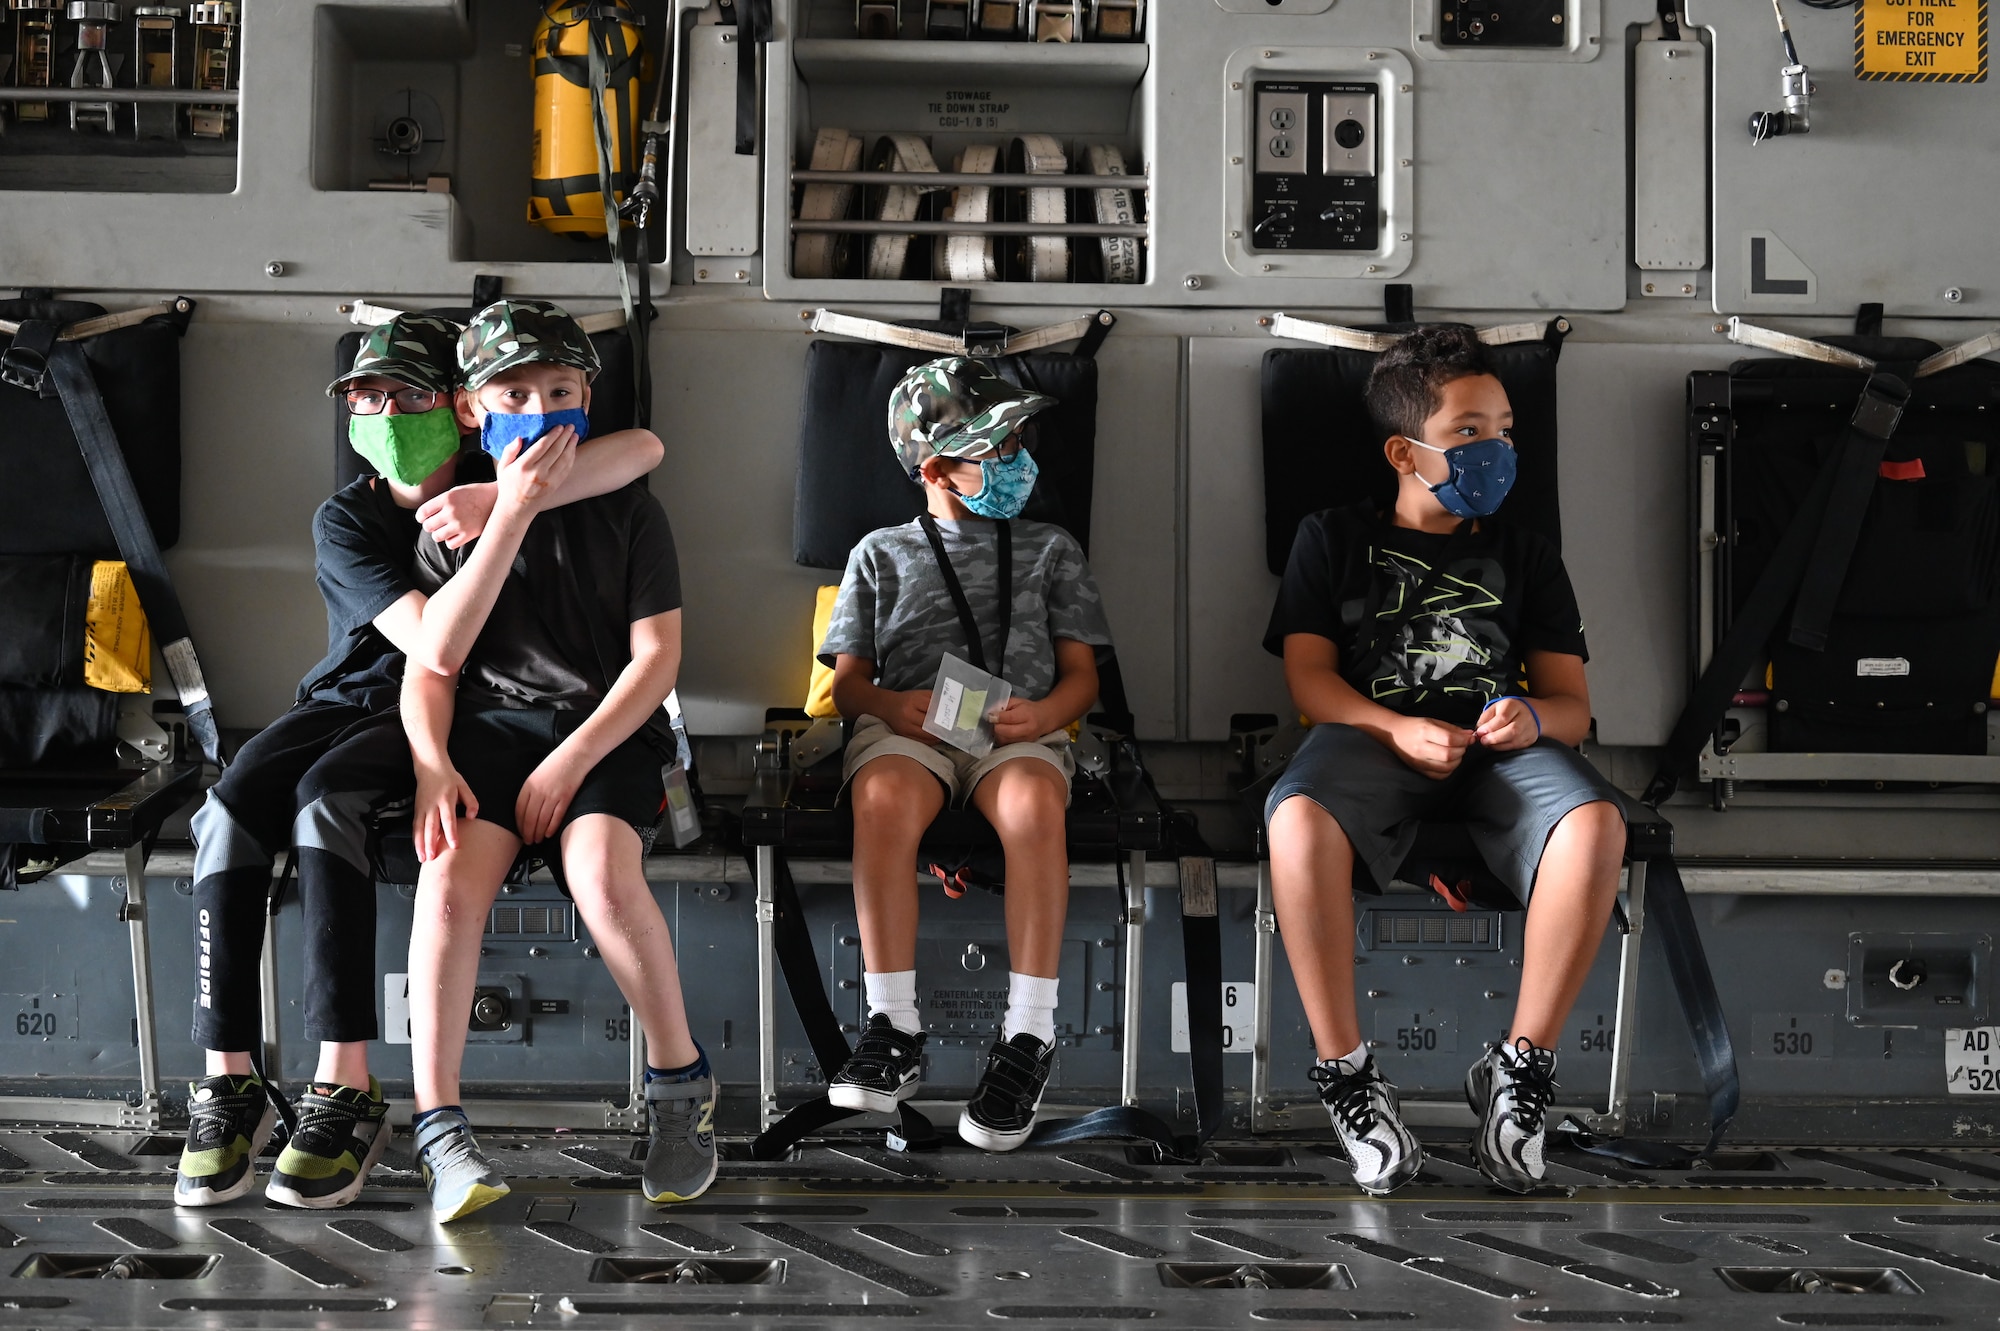 Team McChord children wait inside a C-17 Globemaster III during Operation Kids Understanding Deployment Operations (KUDOs) at Joint Base Lewis-McChord, Washington, Aug. 14, 2021. More than 90 children, ages 4 to 14, participated in the mock deployment. (U.S. Air Force photo by Master Sgt. Julius Delos Reyes)